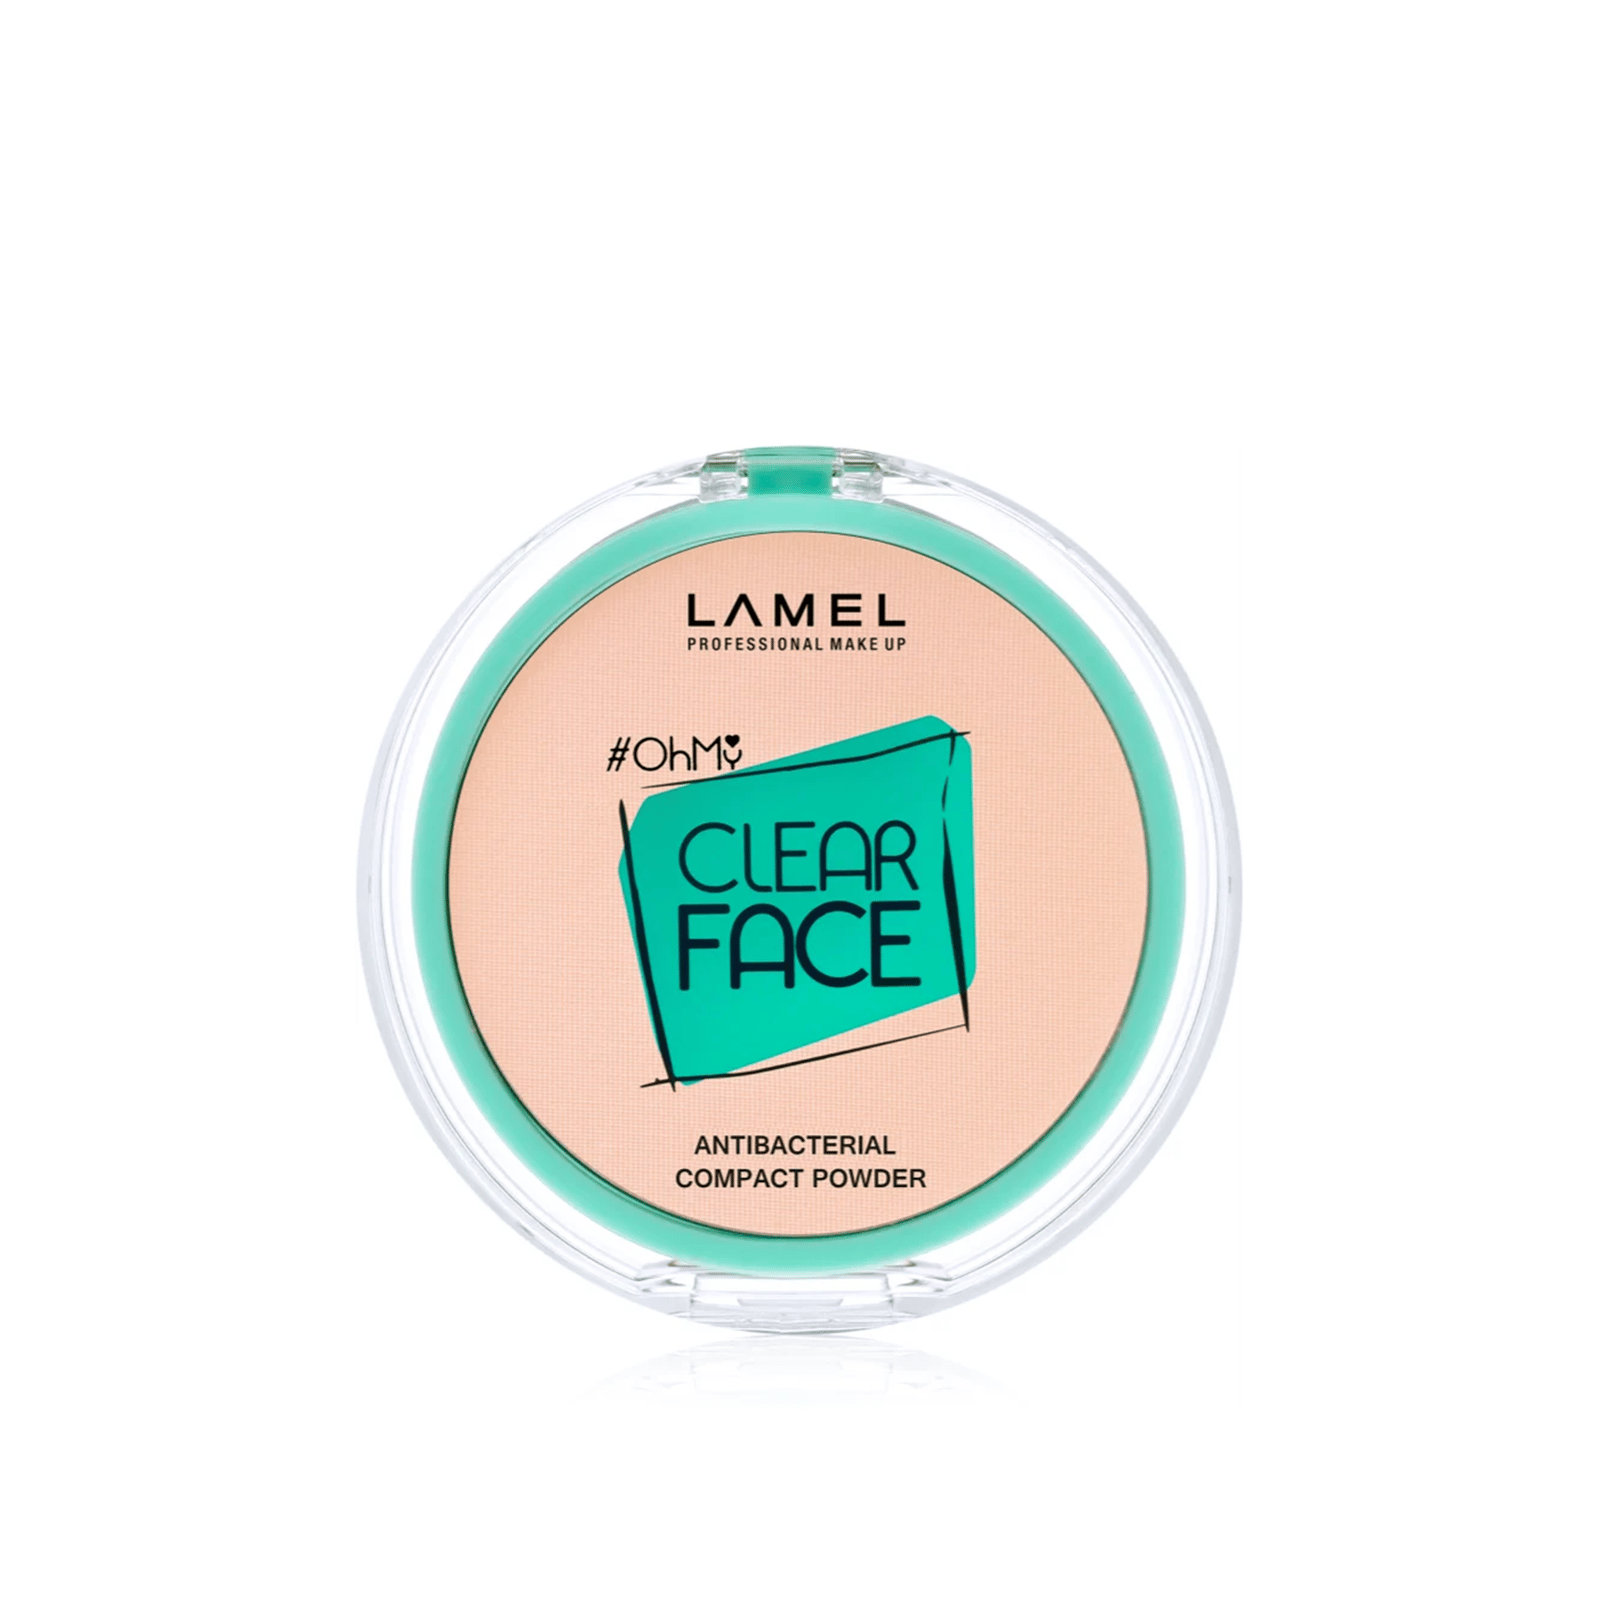 Lamel Oh My Clear Face Compact Powder 403 Rosy Beige 6g (0.21oz)